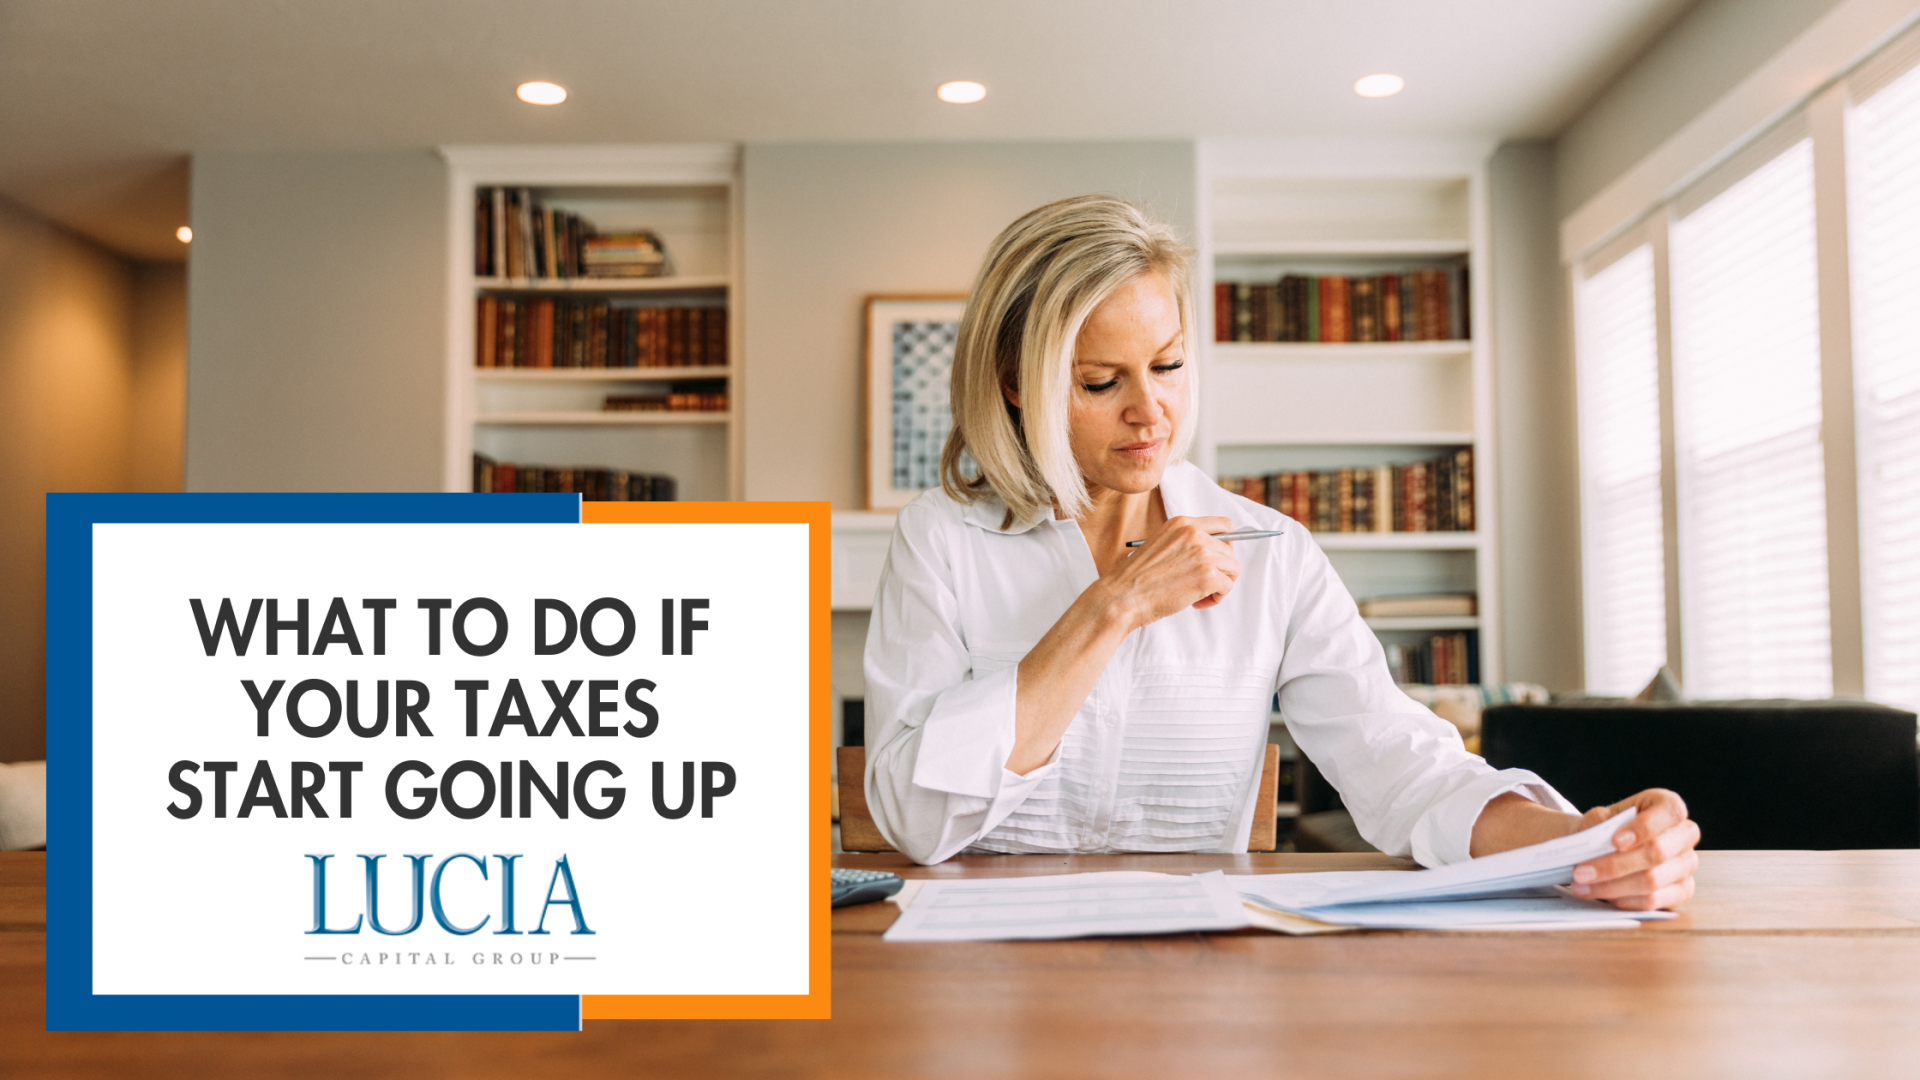 What to do if your taxes start going up